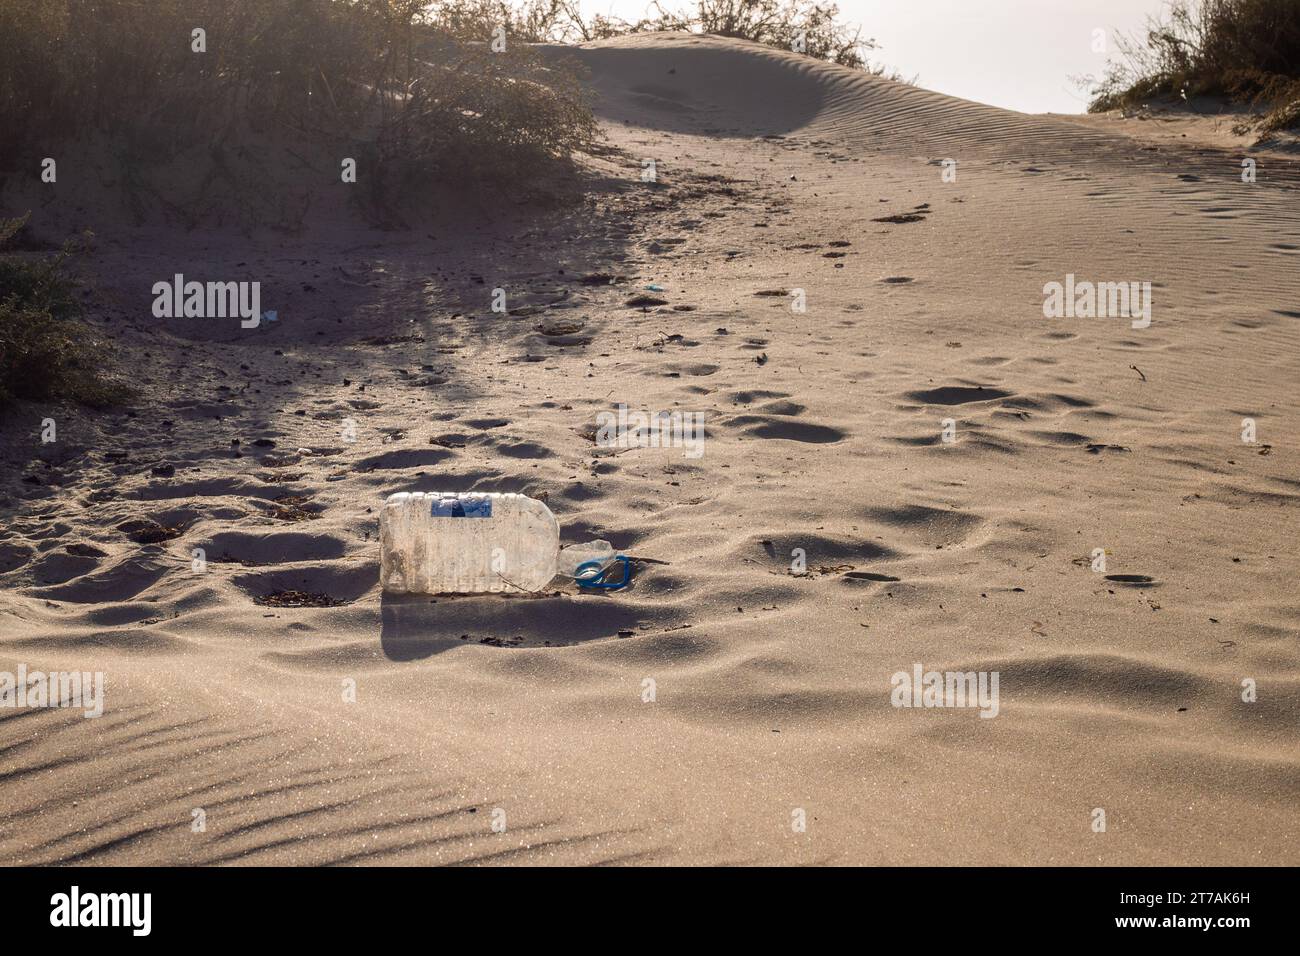 Sand dune with garbage from tourists. A plastic bottle is lying on the sand. Stock Photo